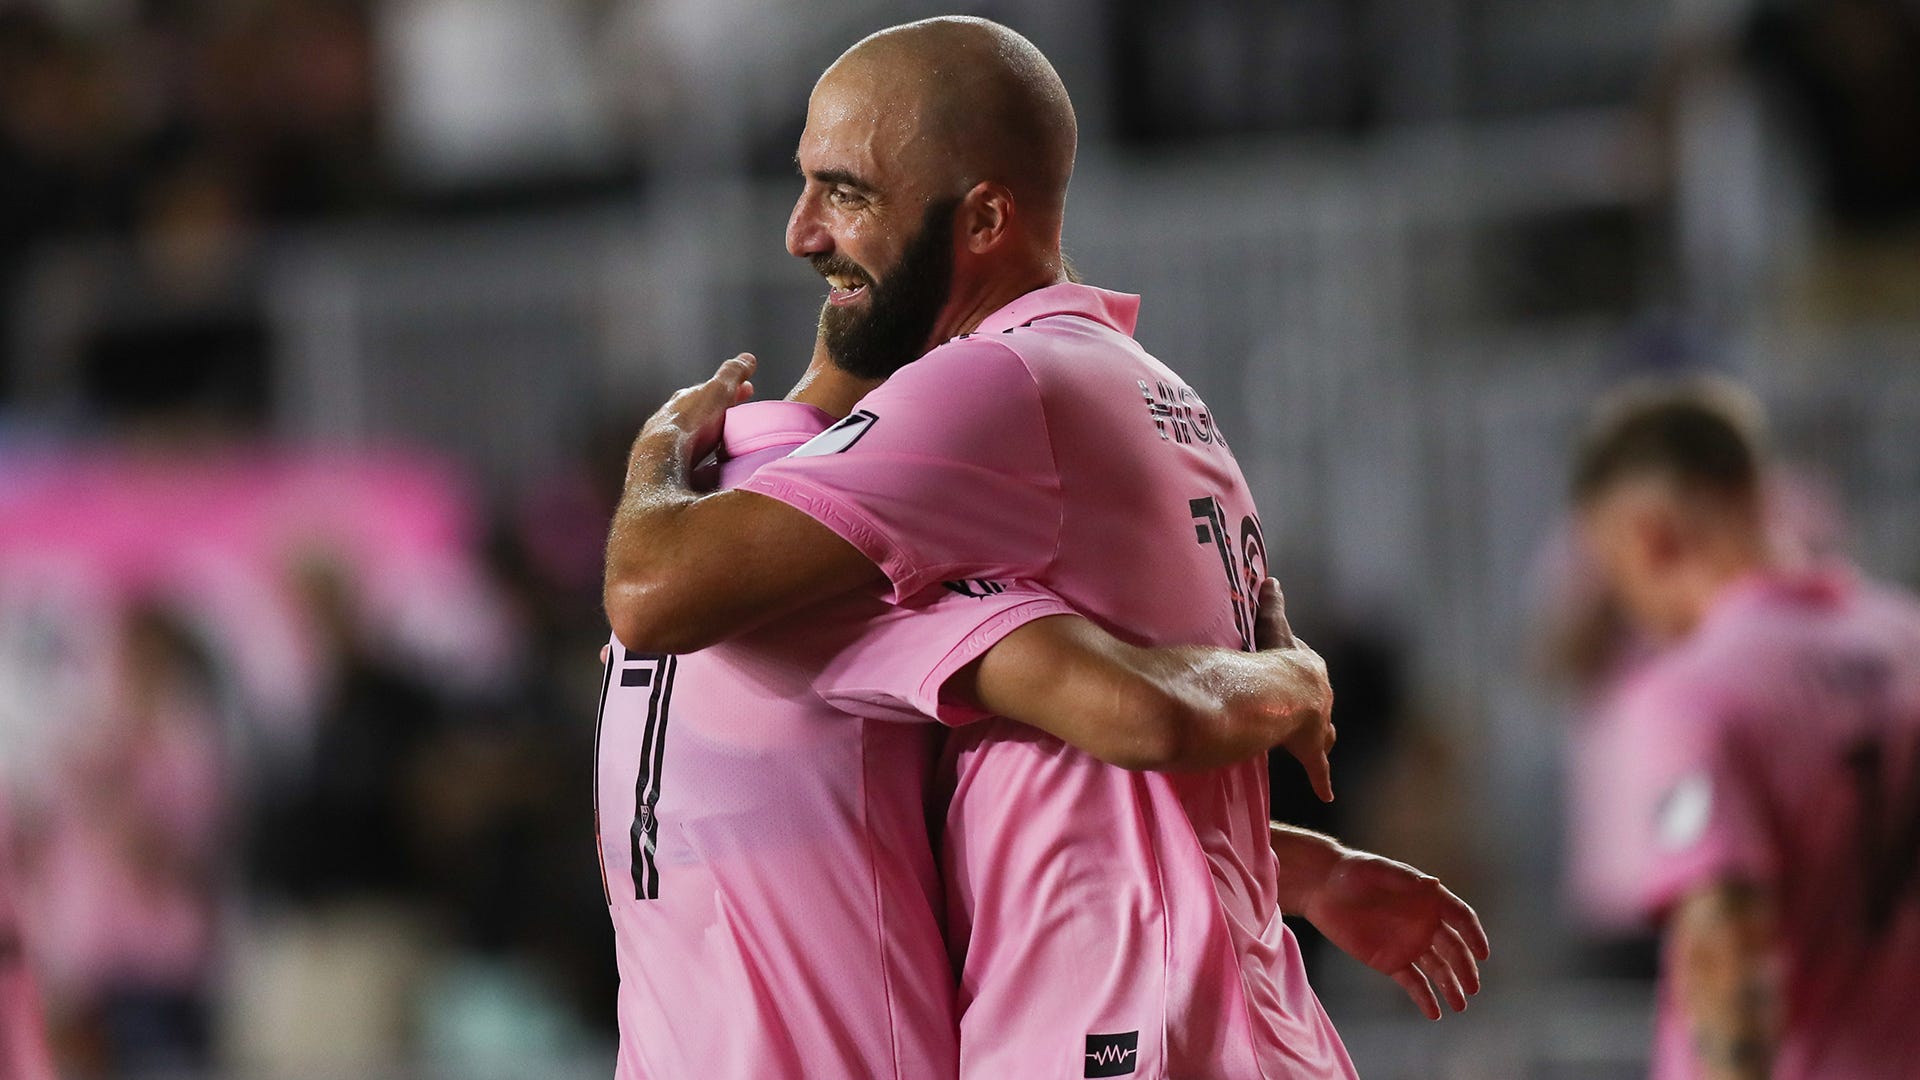 The incredible team of players that Palermo have let go in recent years